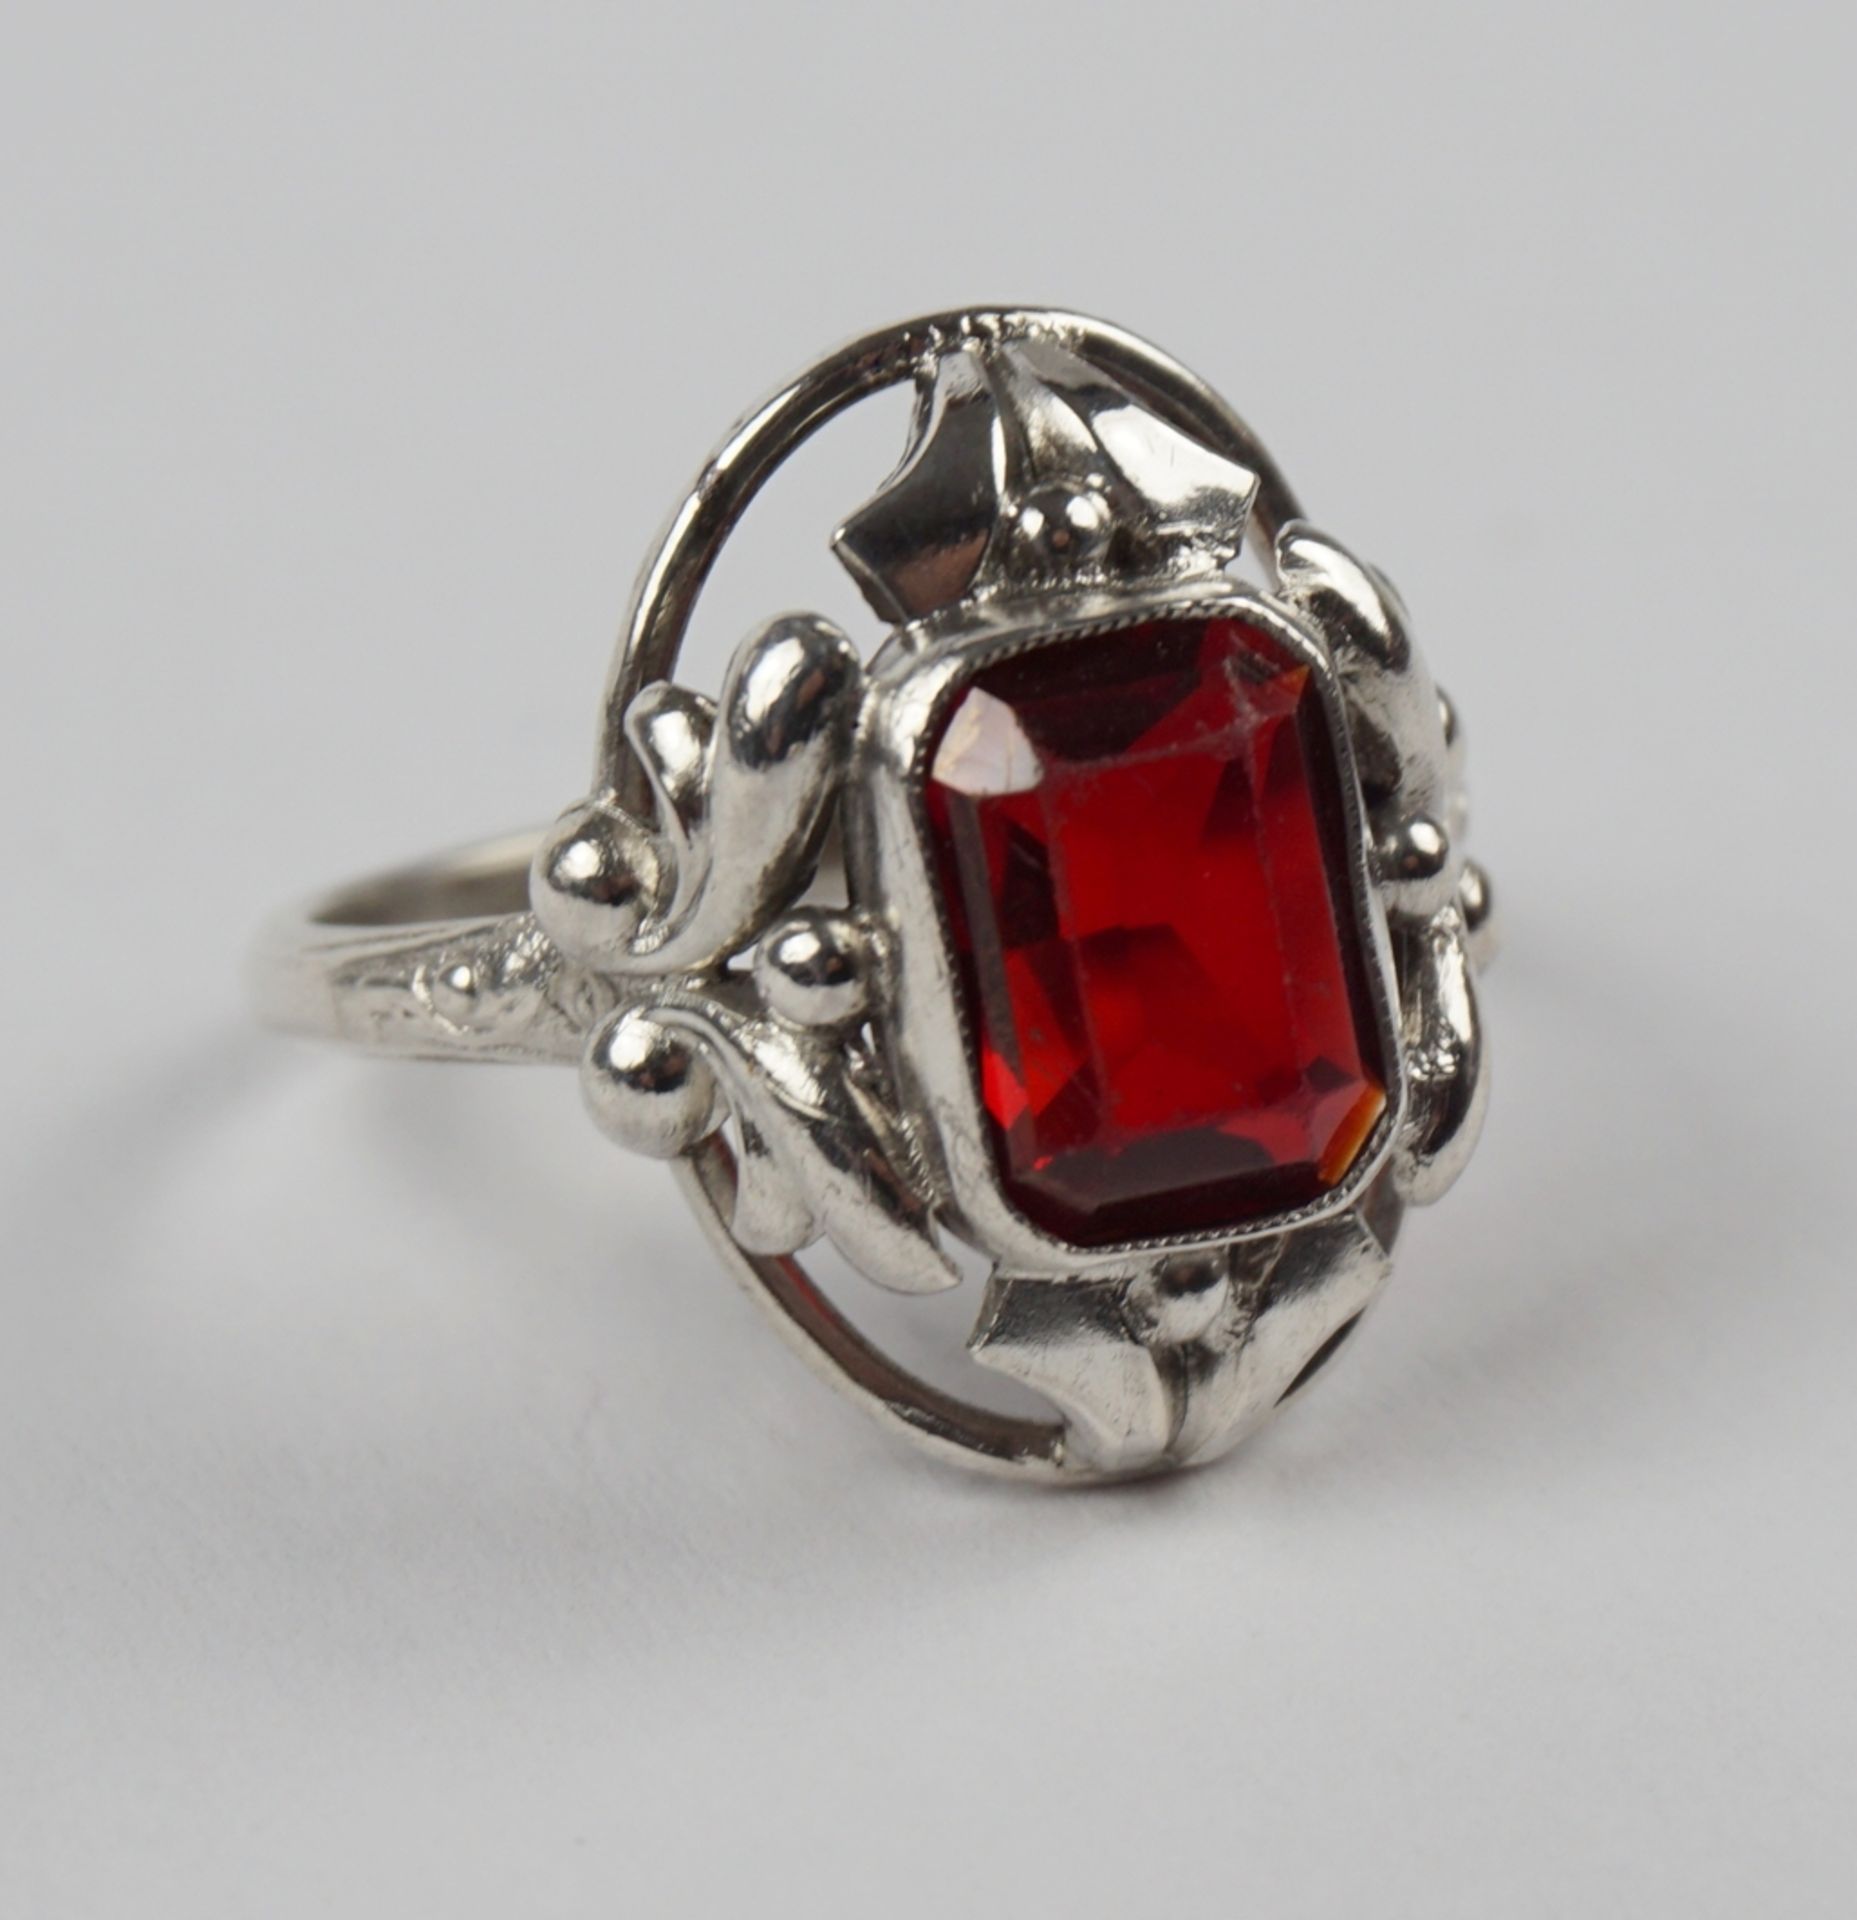 Ring with garnet red stone, 835 silver, wt.3,46g - Image 2 of 2